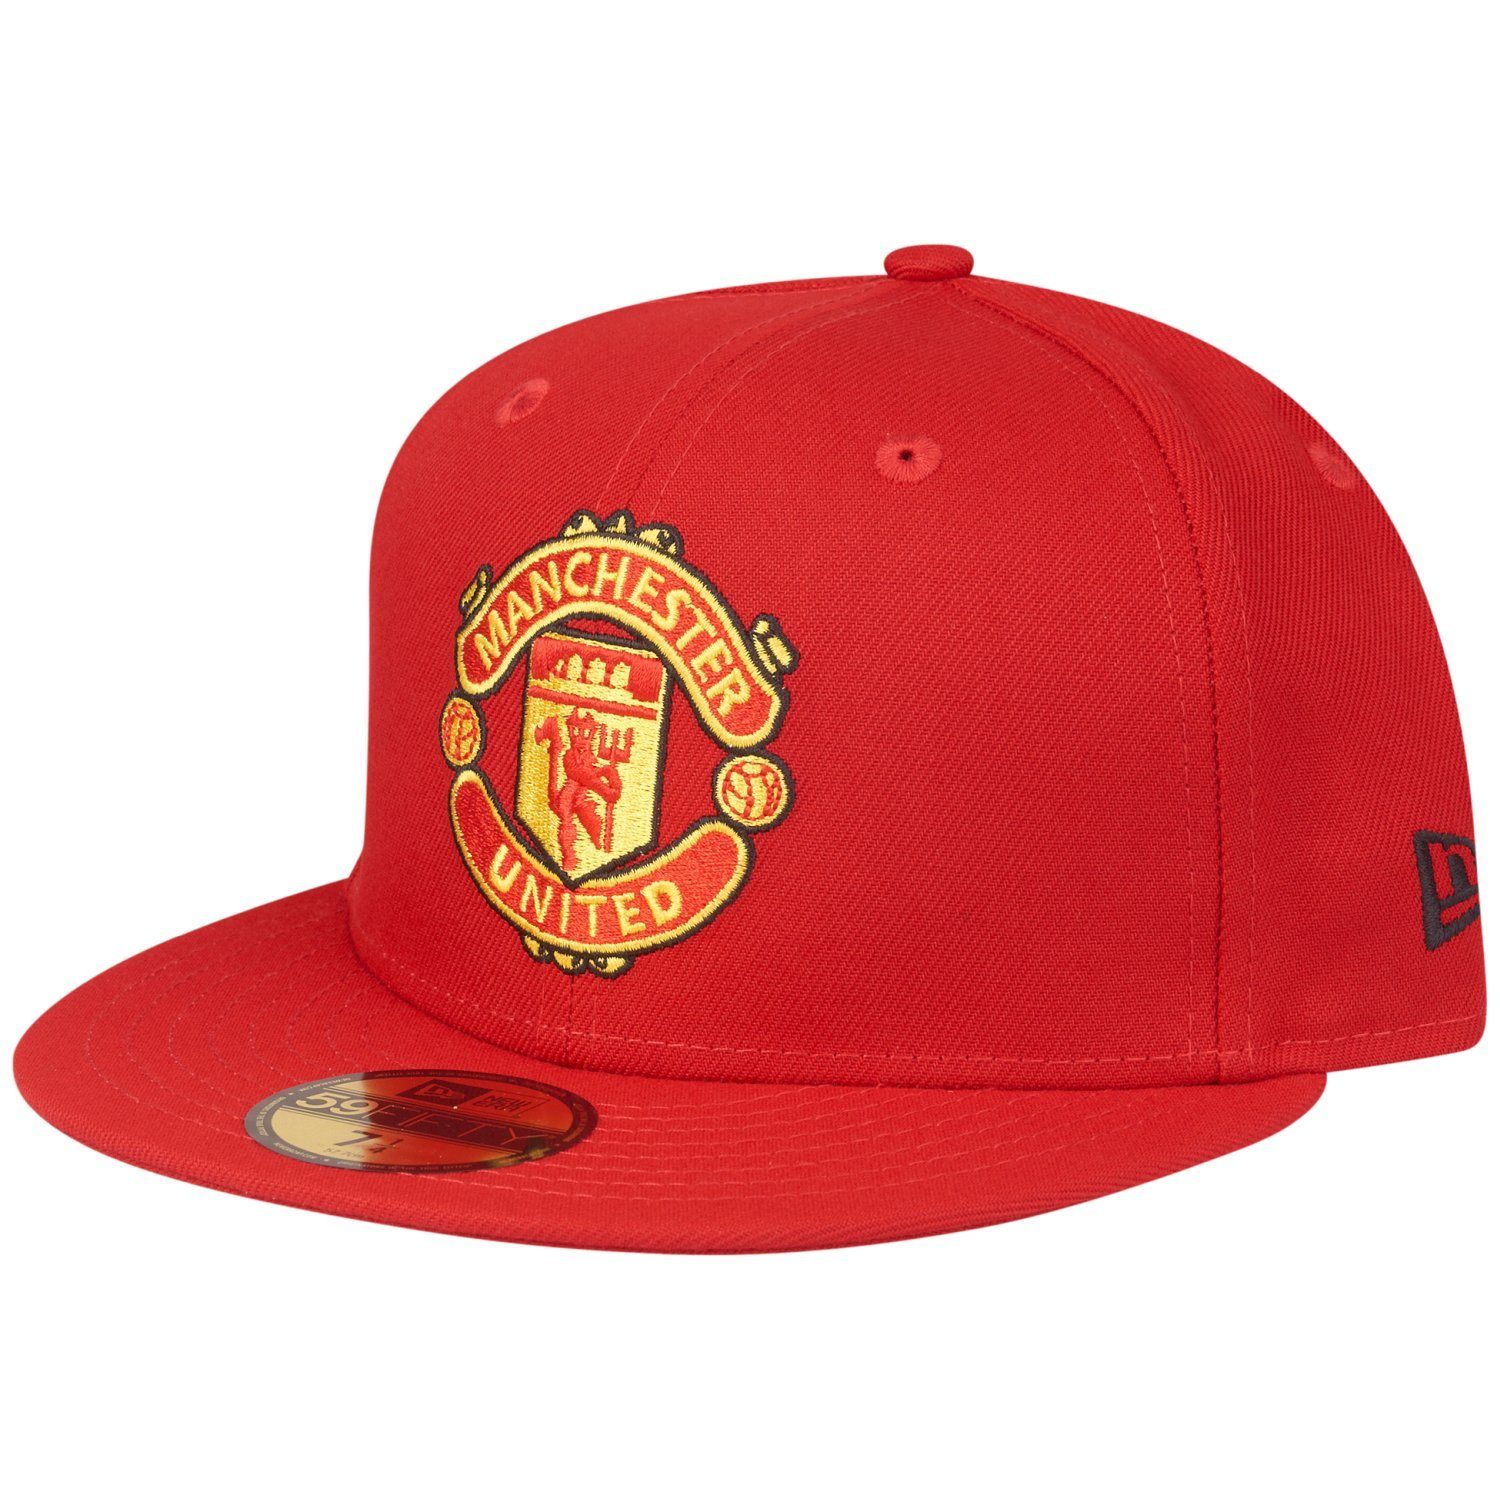 New Era Fitted 59Fifty Cap F.C. United Manchester